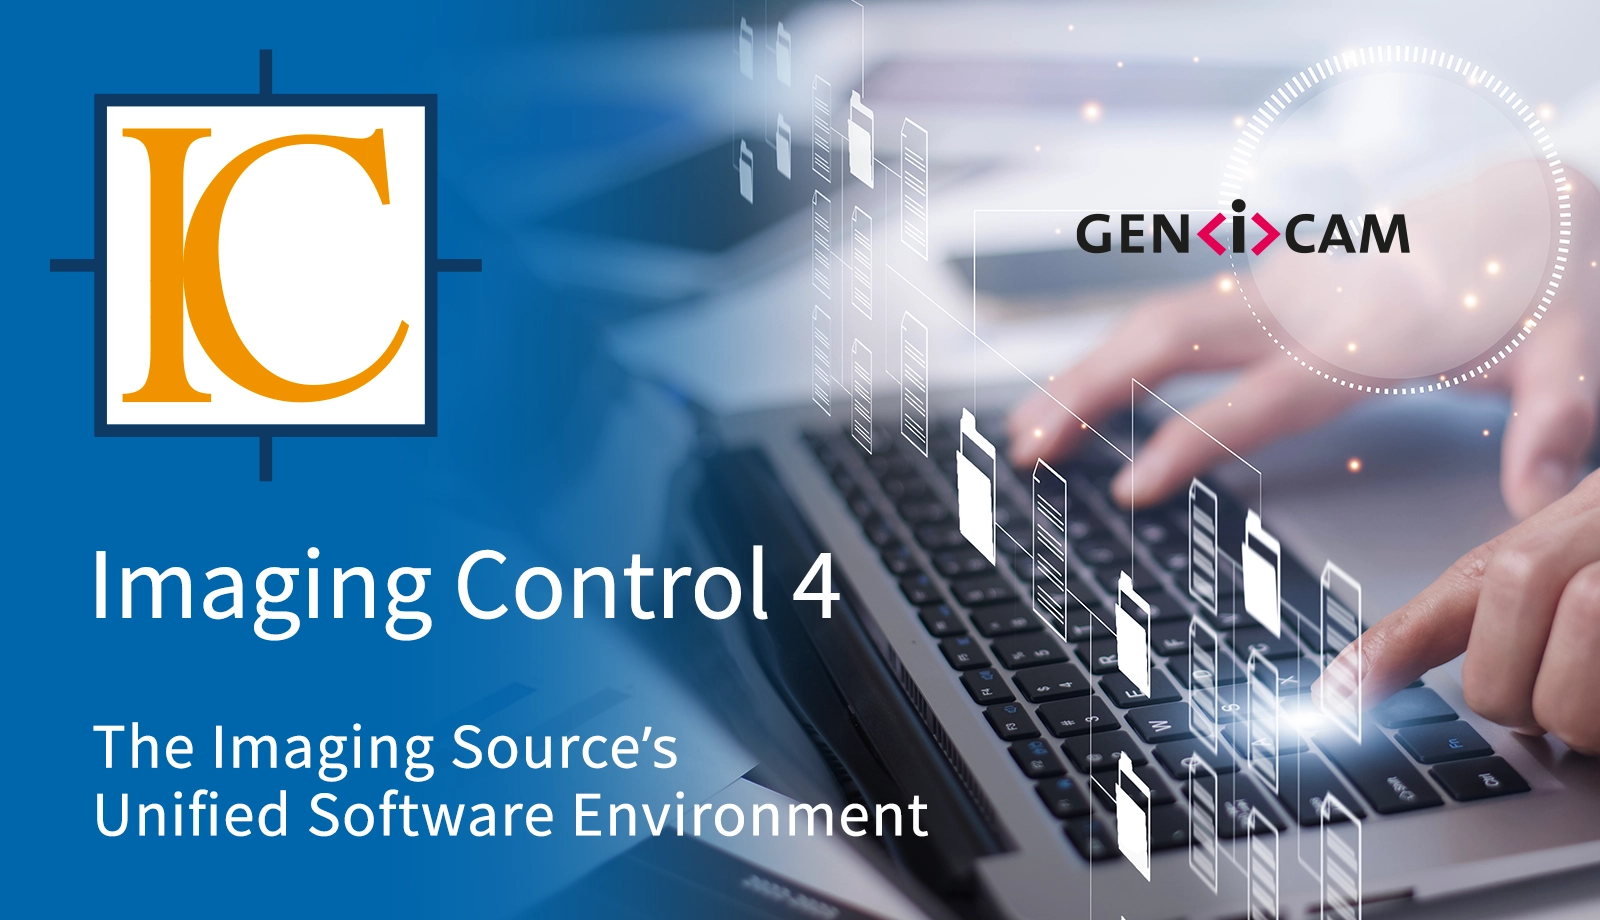 IC Imaging Control 4: The Imaging Source's unified software environment